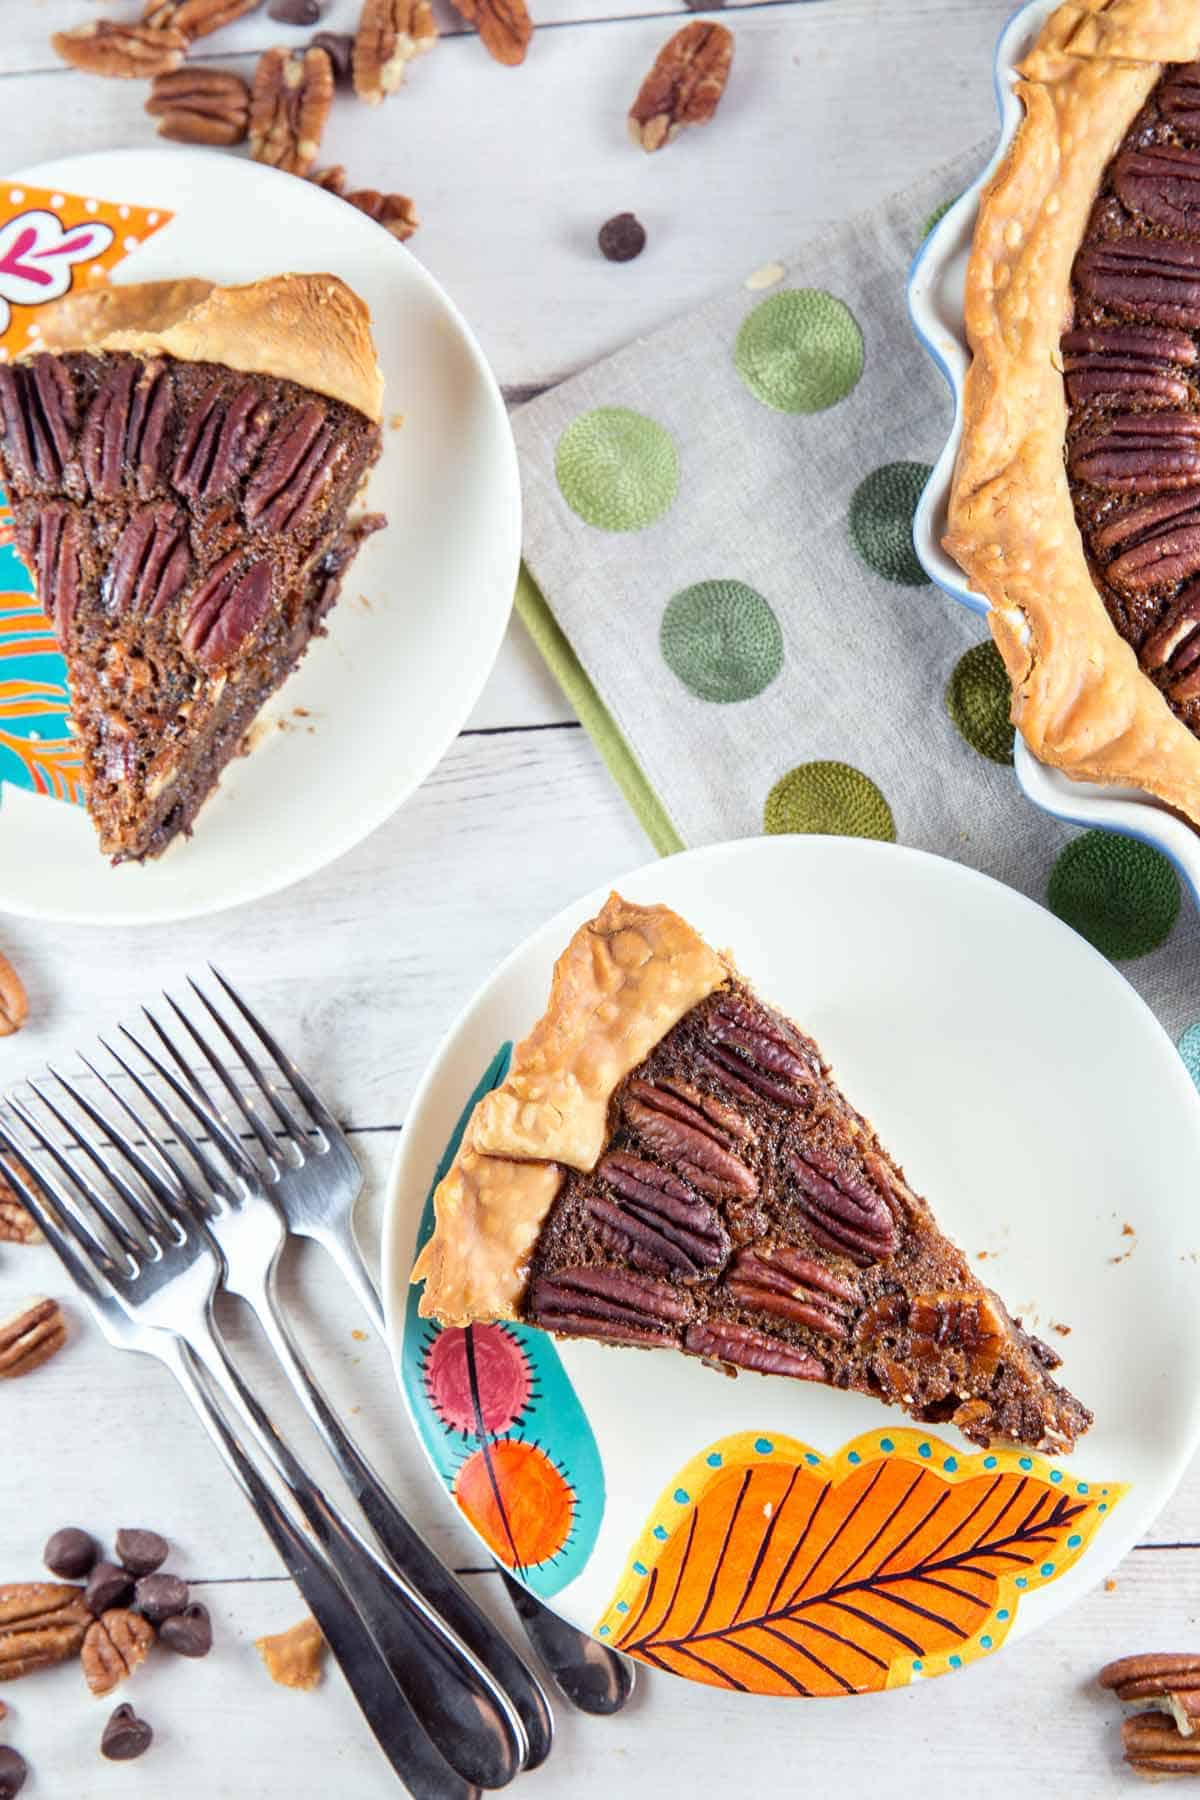 two slices of chocolate bourbon pecan pie on fall themed dessert plates